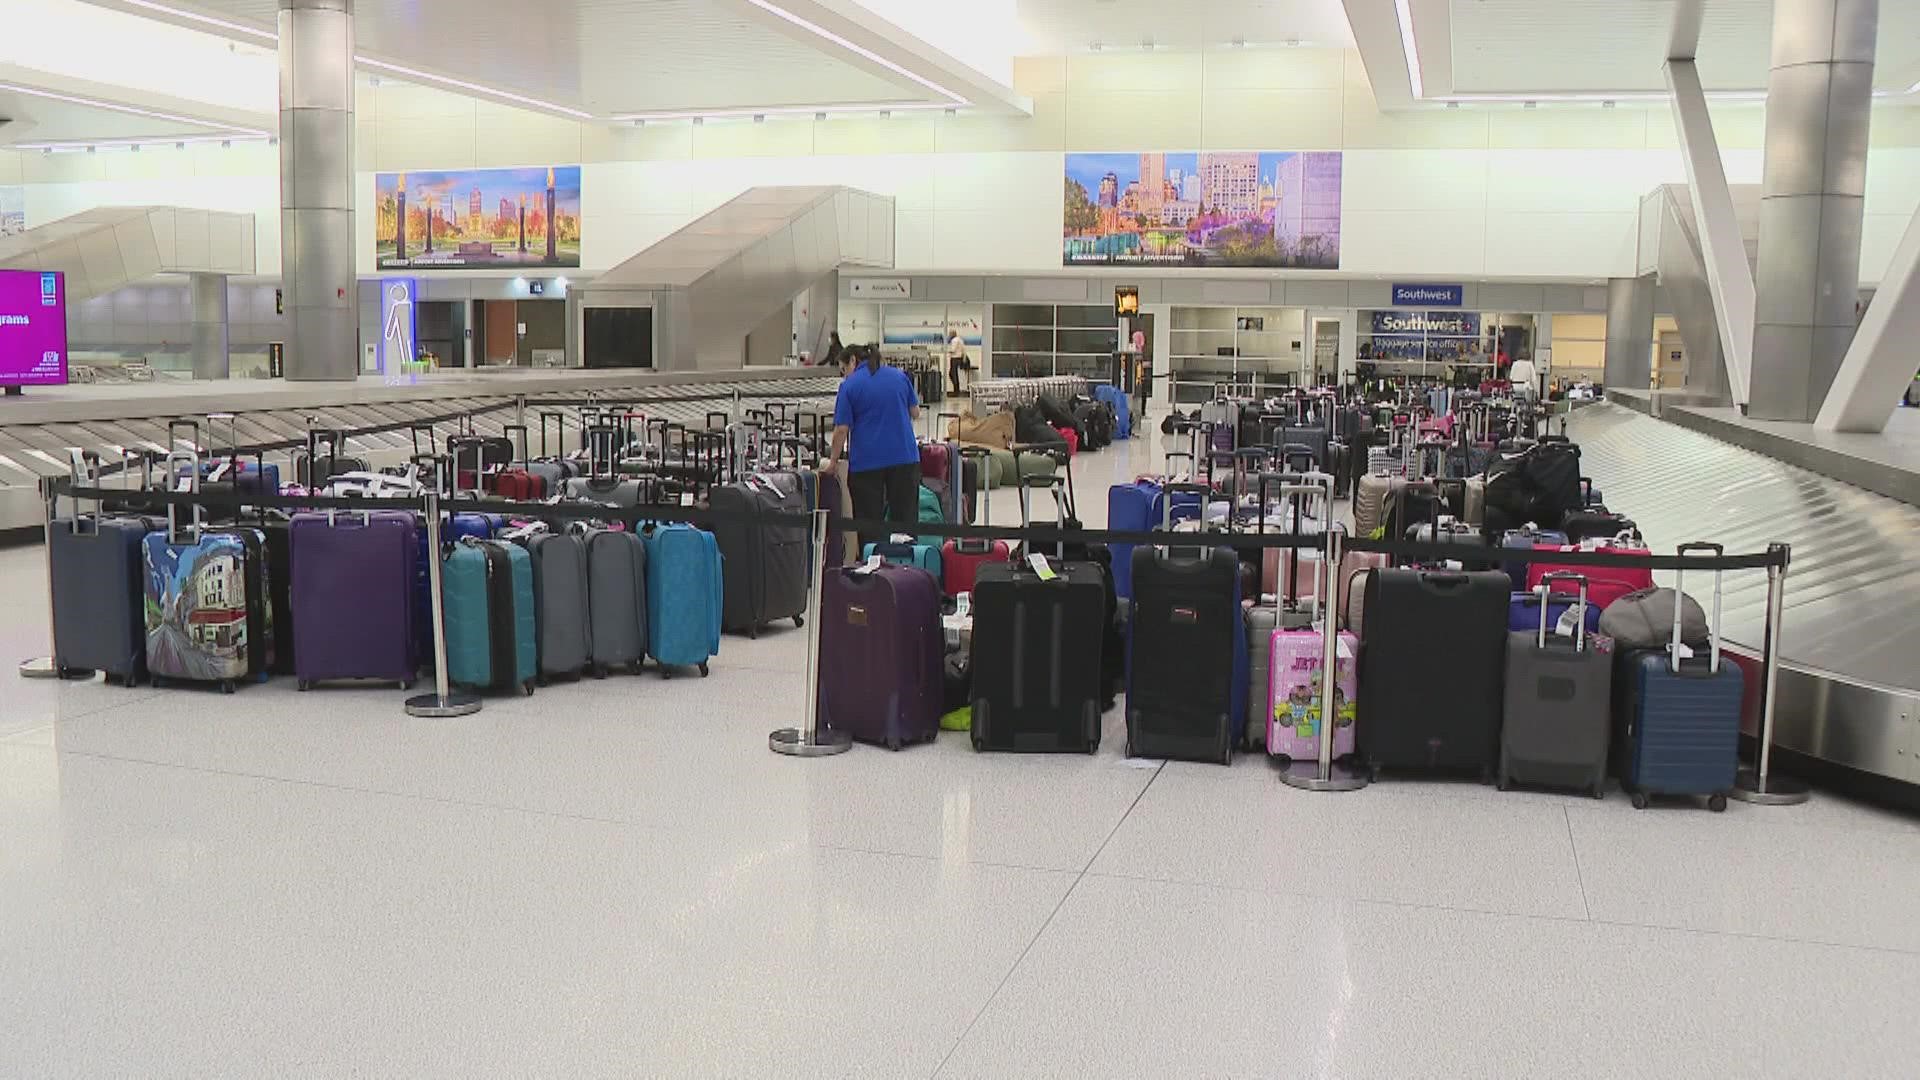 Amid flight cancellations, unclaimed luggage stacks up at IND | wthr.com